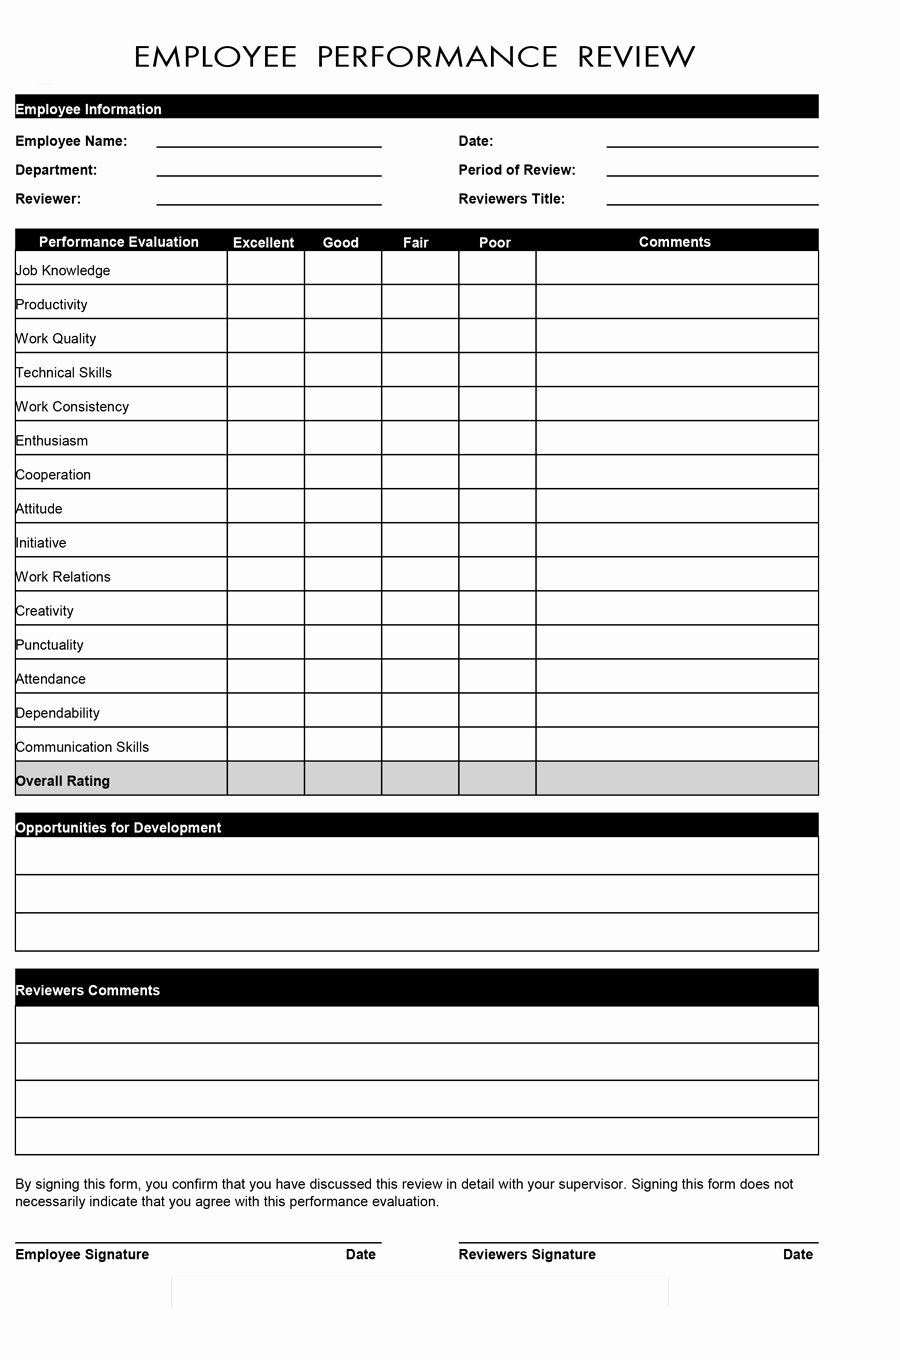 Employee Review form Template Lovely 46 Employee Evaluation forms &amp; Performance Review Examples